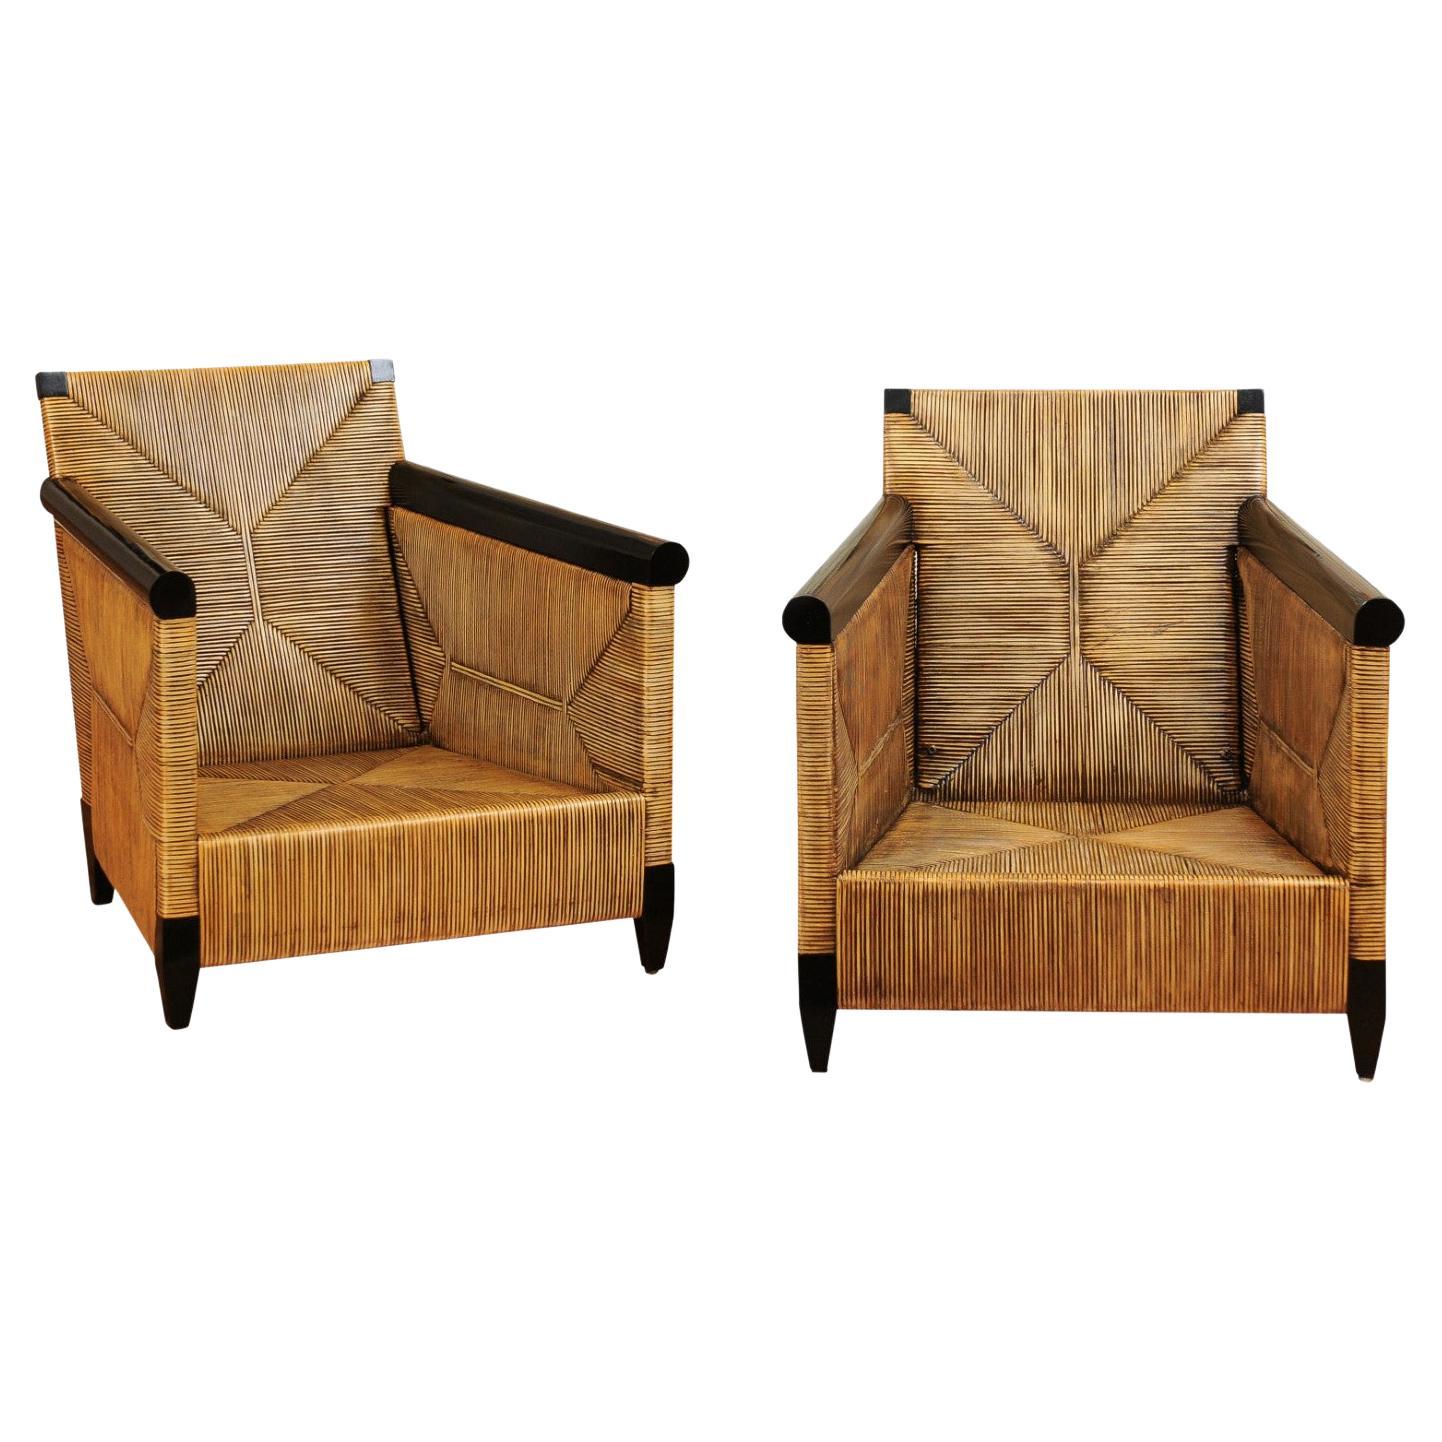 Sublime Pair of Rush Cane and Mahogany Loungers by John Hutton for Donghia